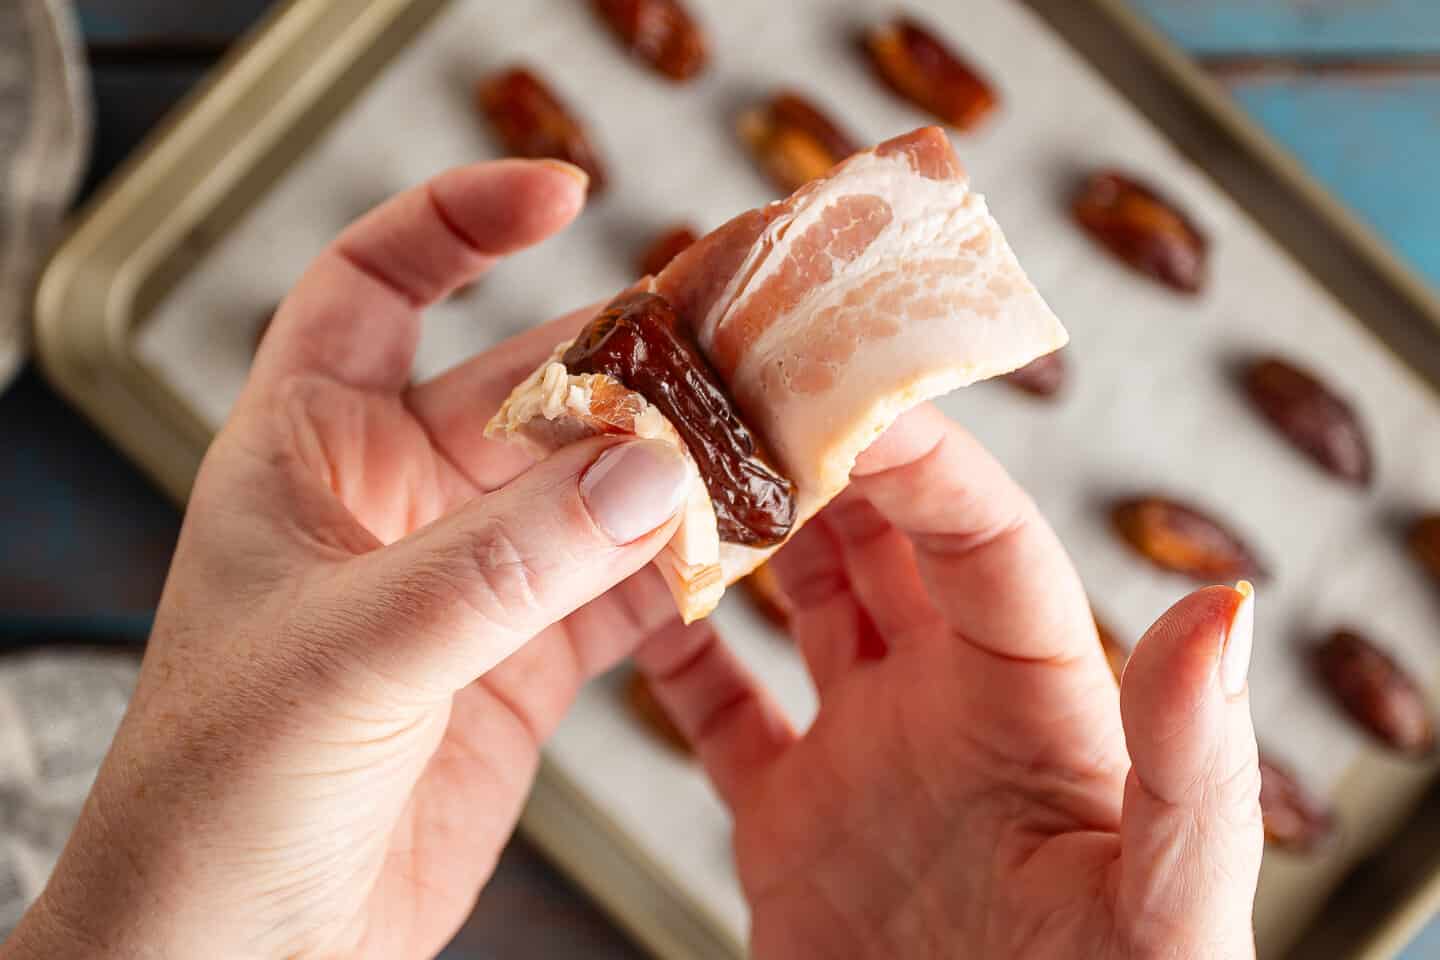 Wrapping a thick slice of bacon around a stuffed date.